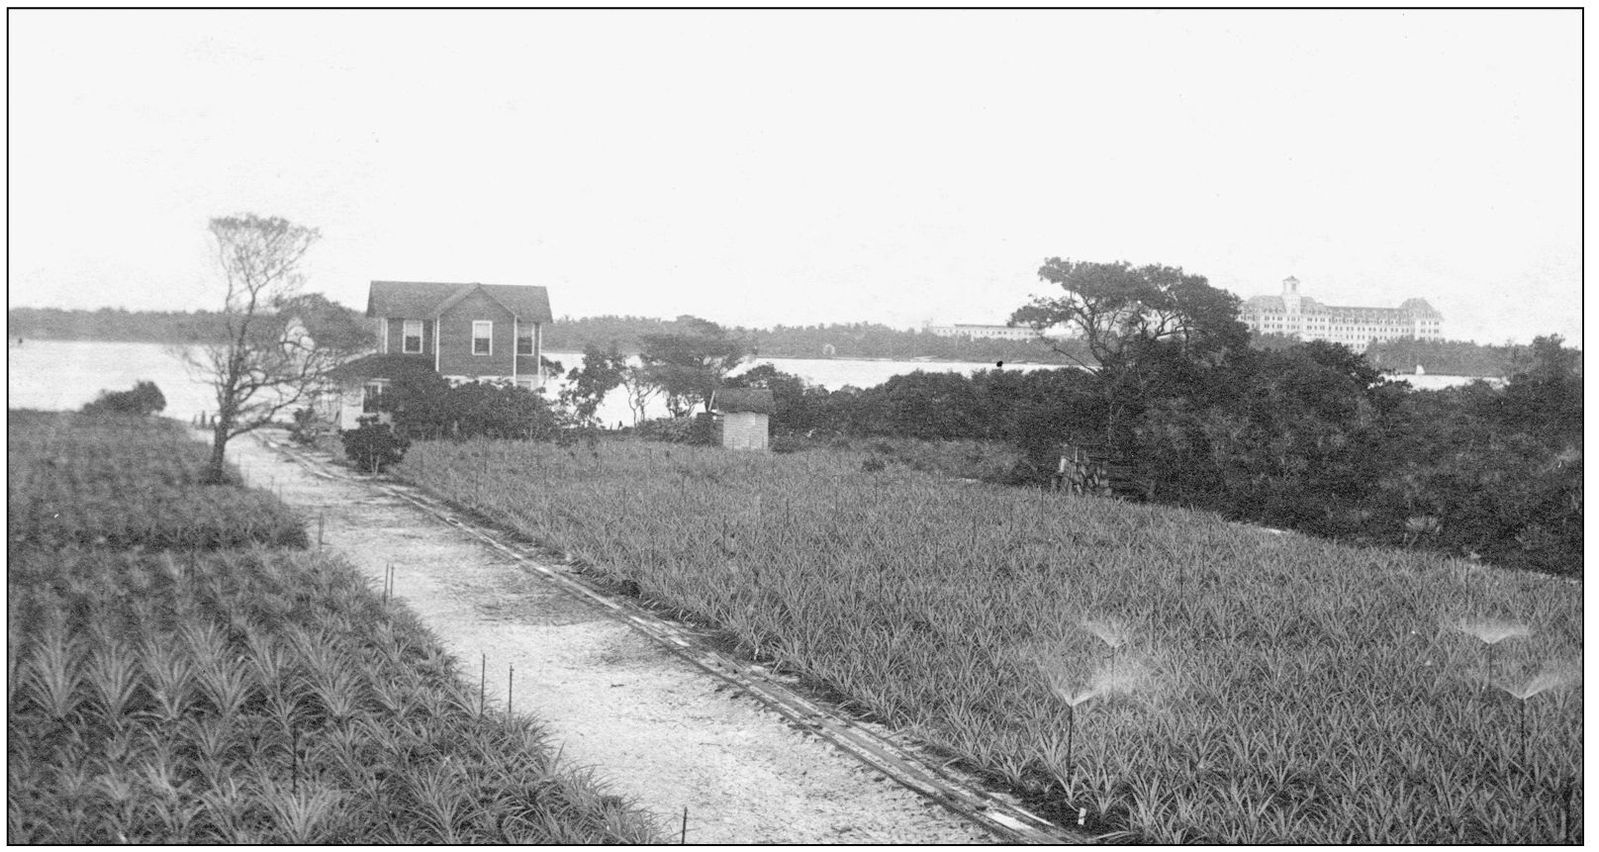 The Royal Poinciana Hotel on Palm Beach could be seen from the Clow residence - photo 5